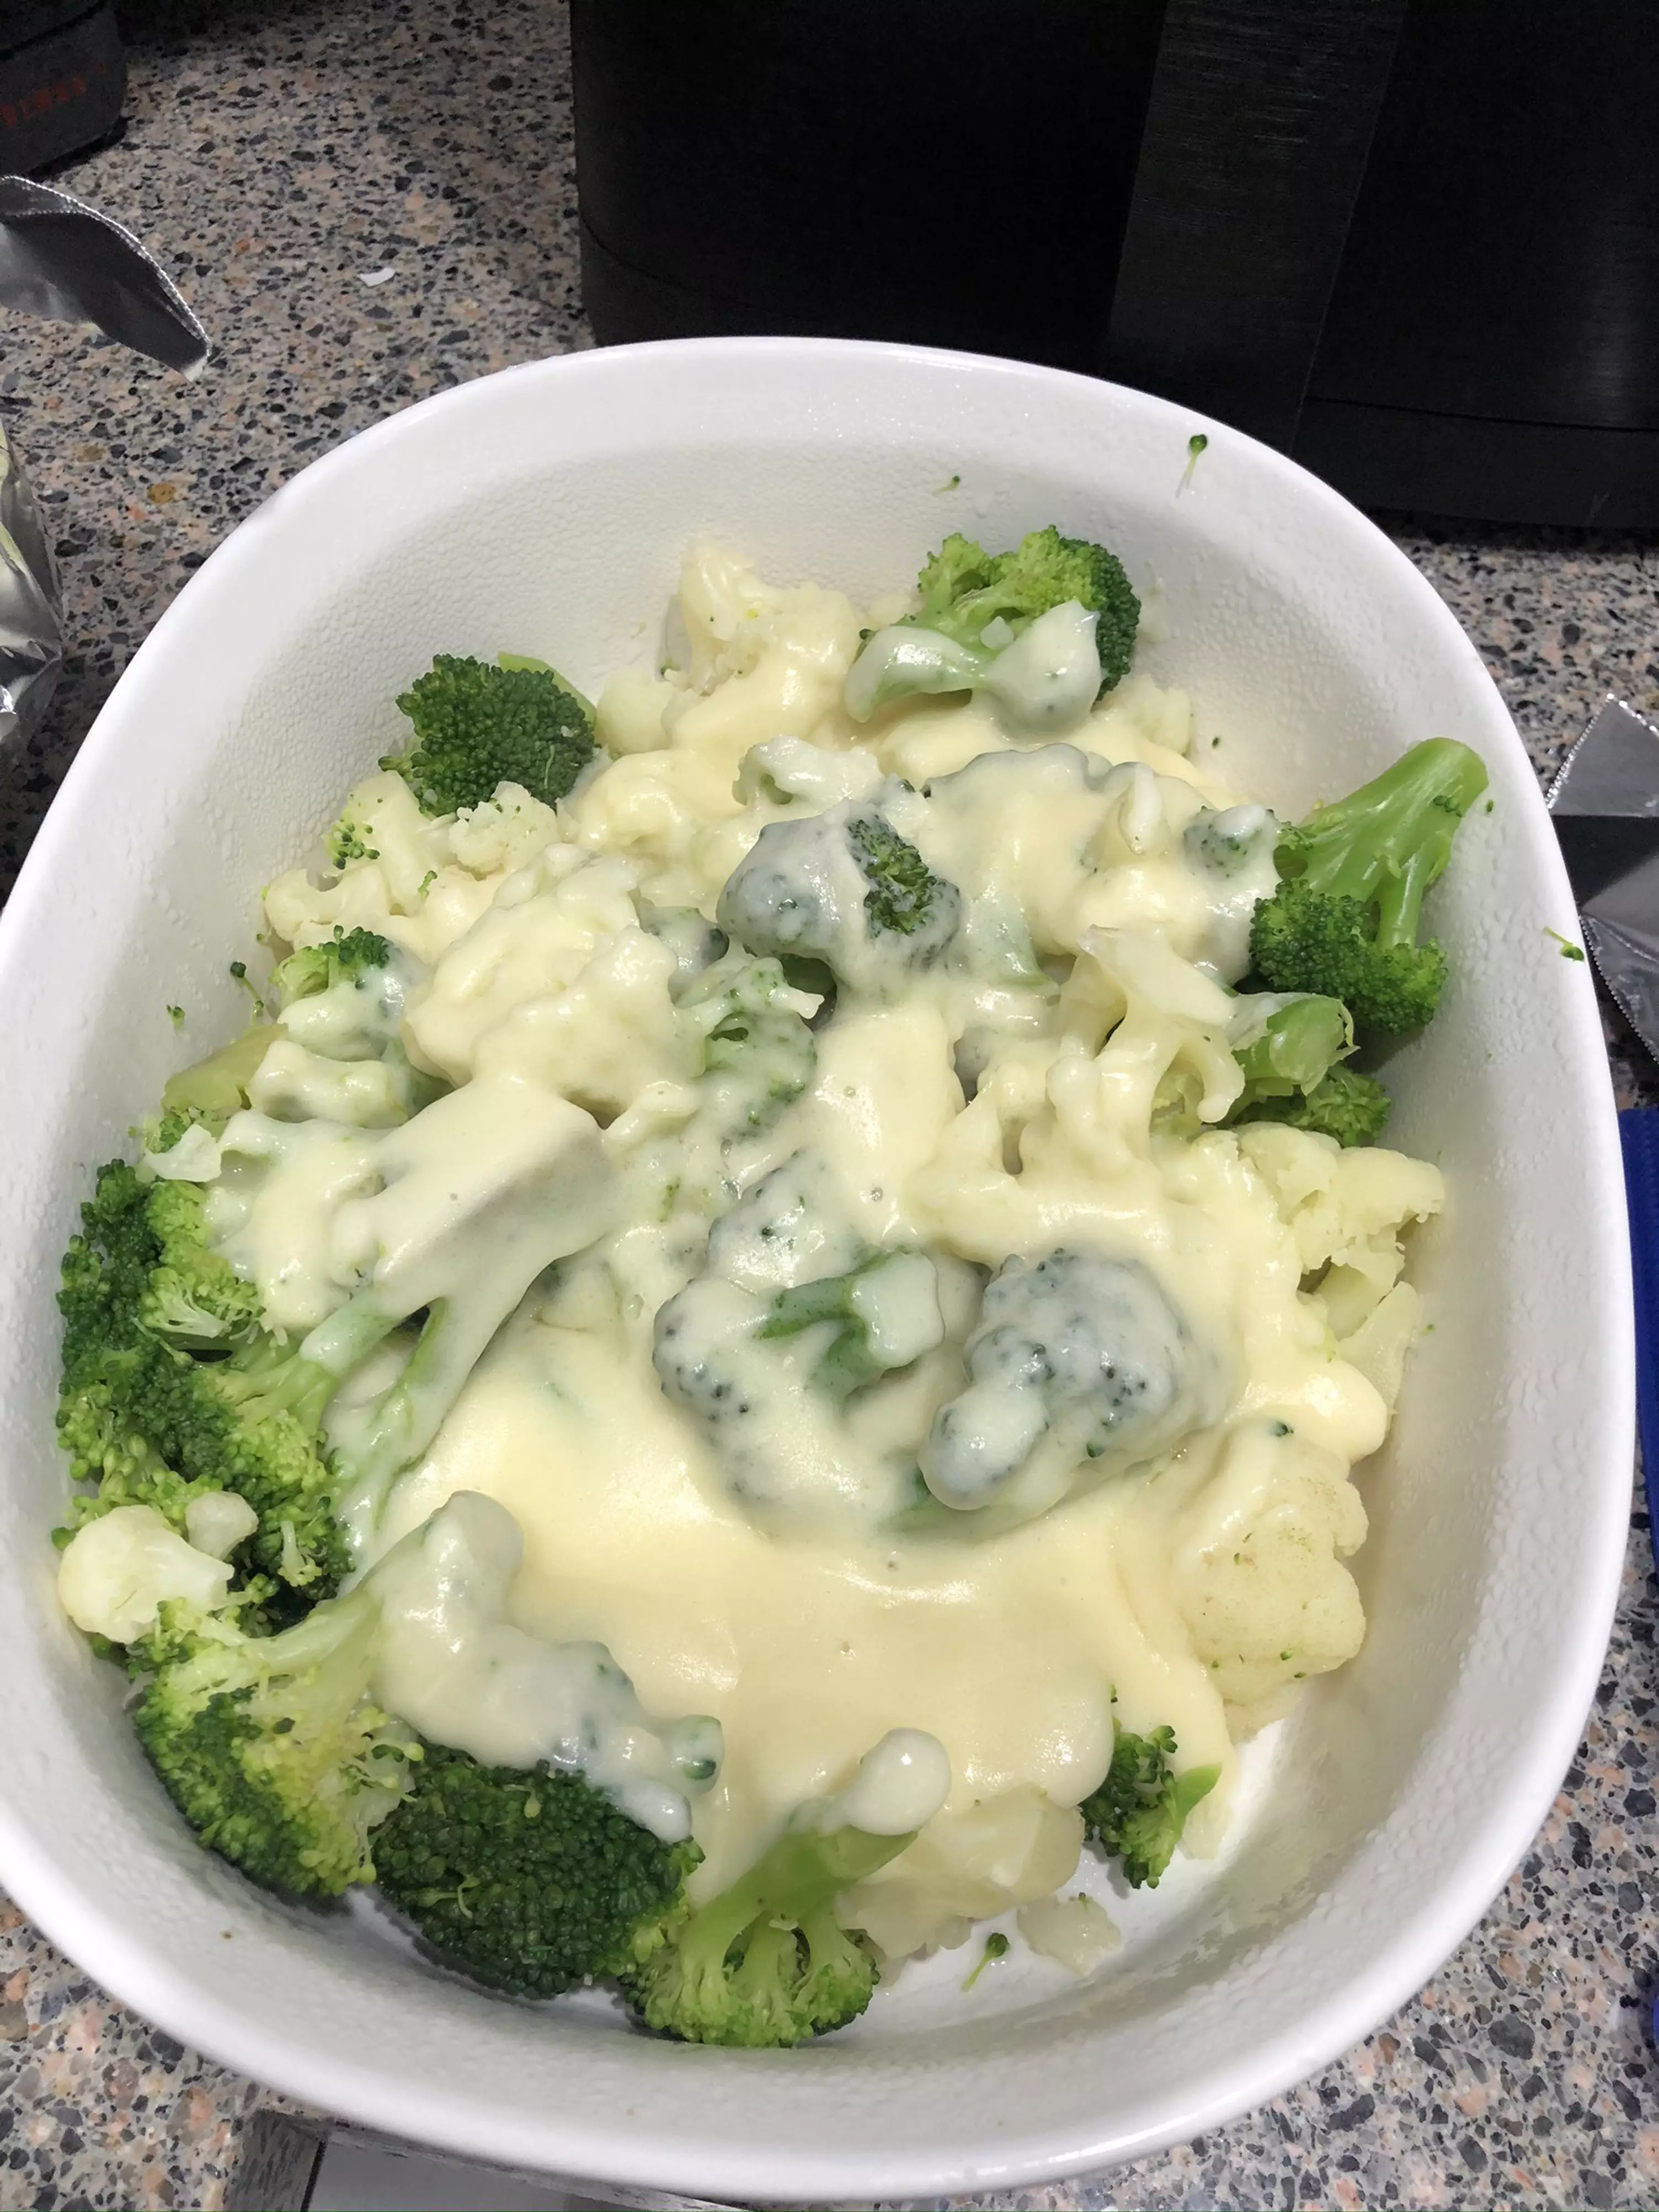 Facebook users took particular issue with the broccoli cheese (